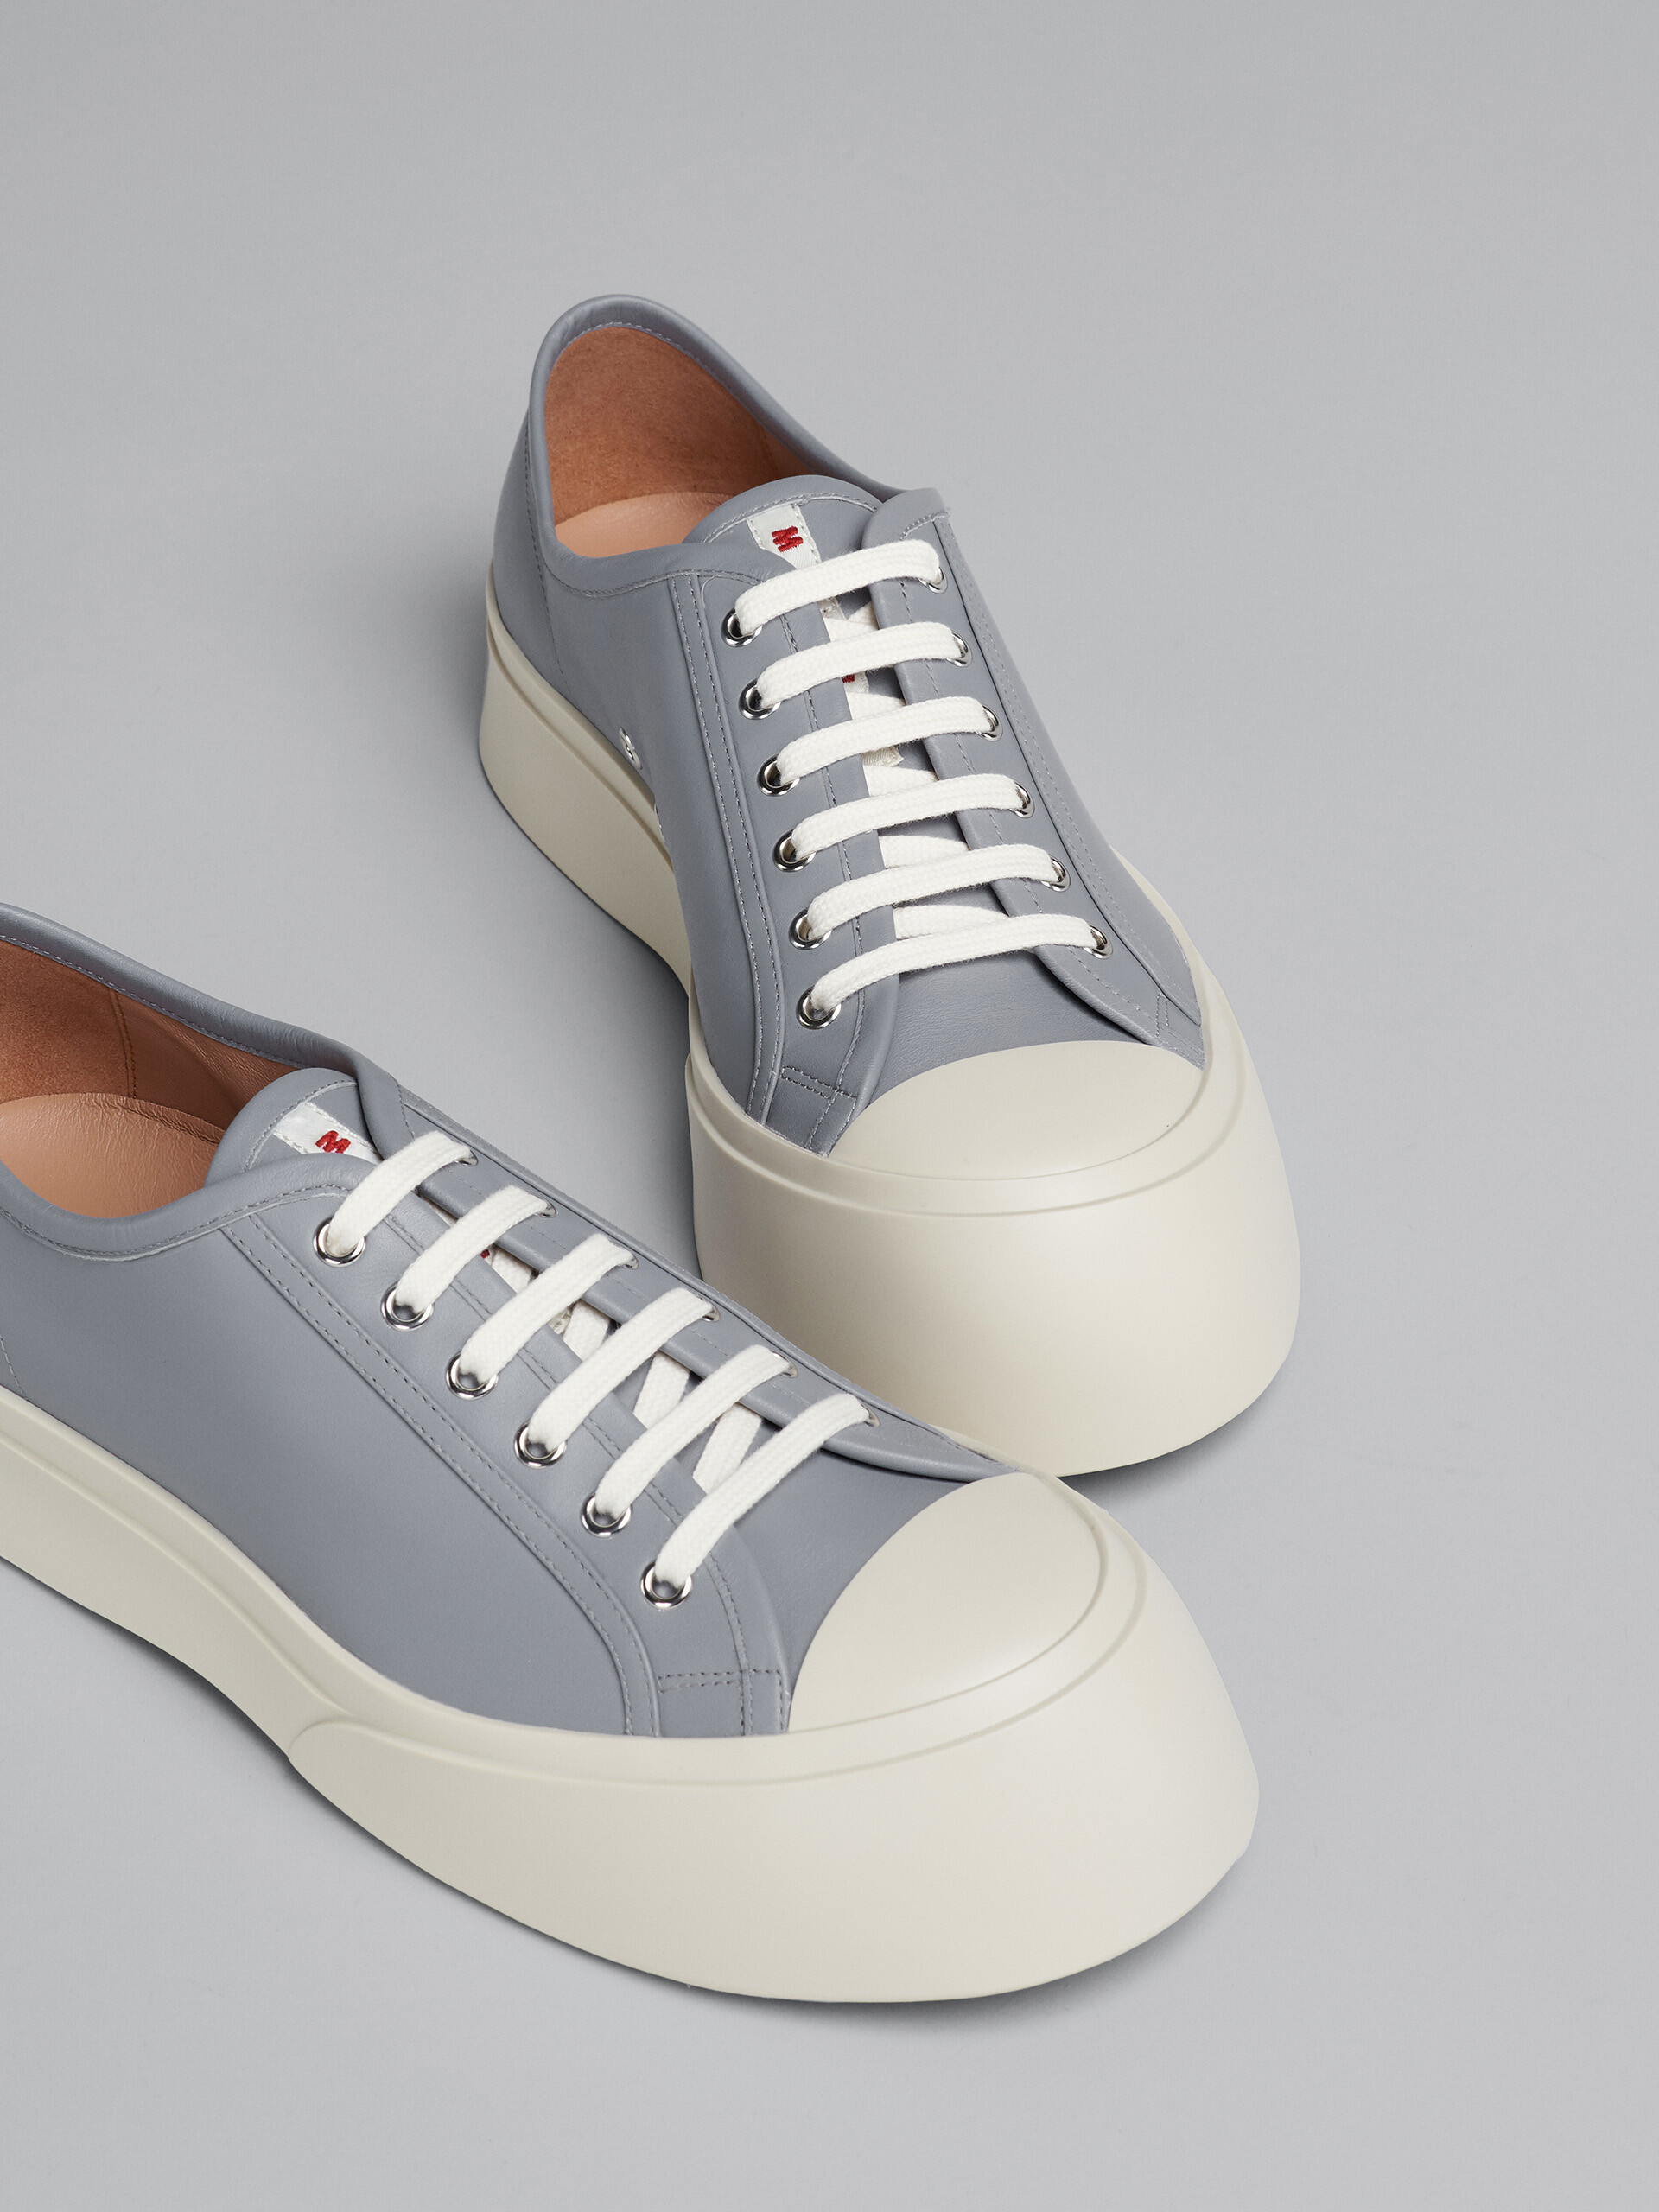 Grey nappa leather PABLO sneaker - Sneakers - Image 5